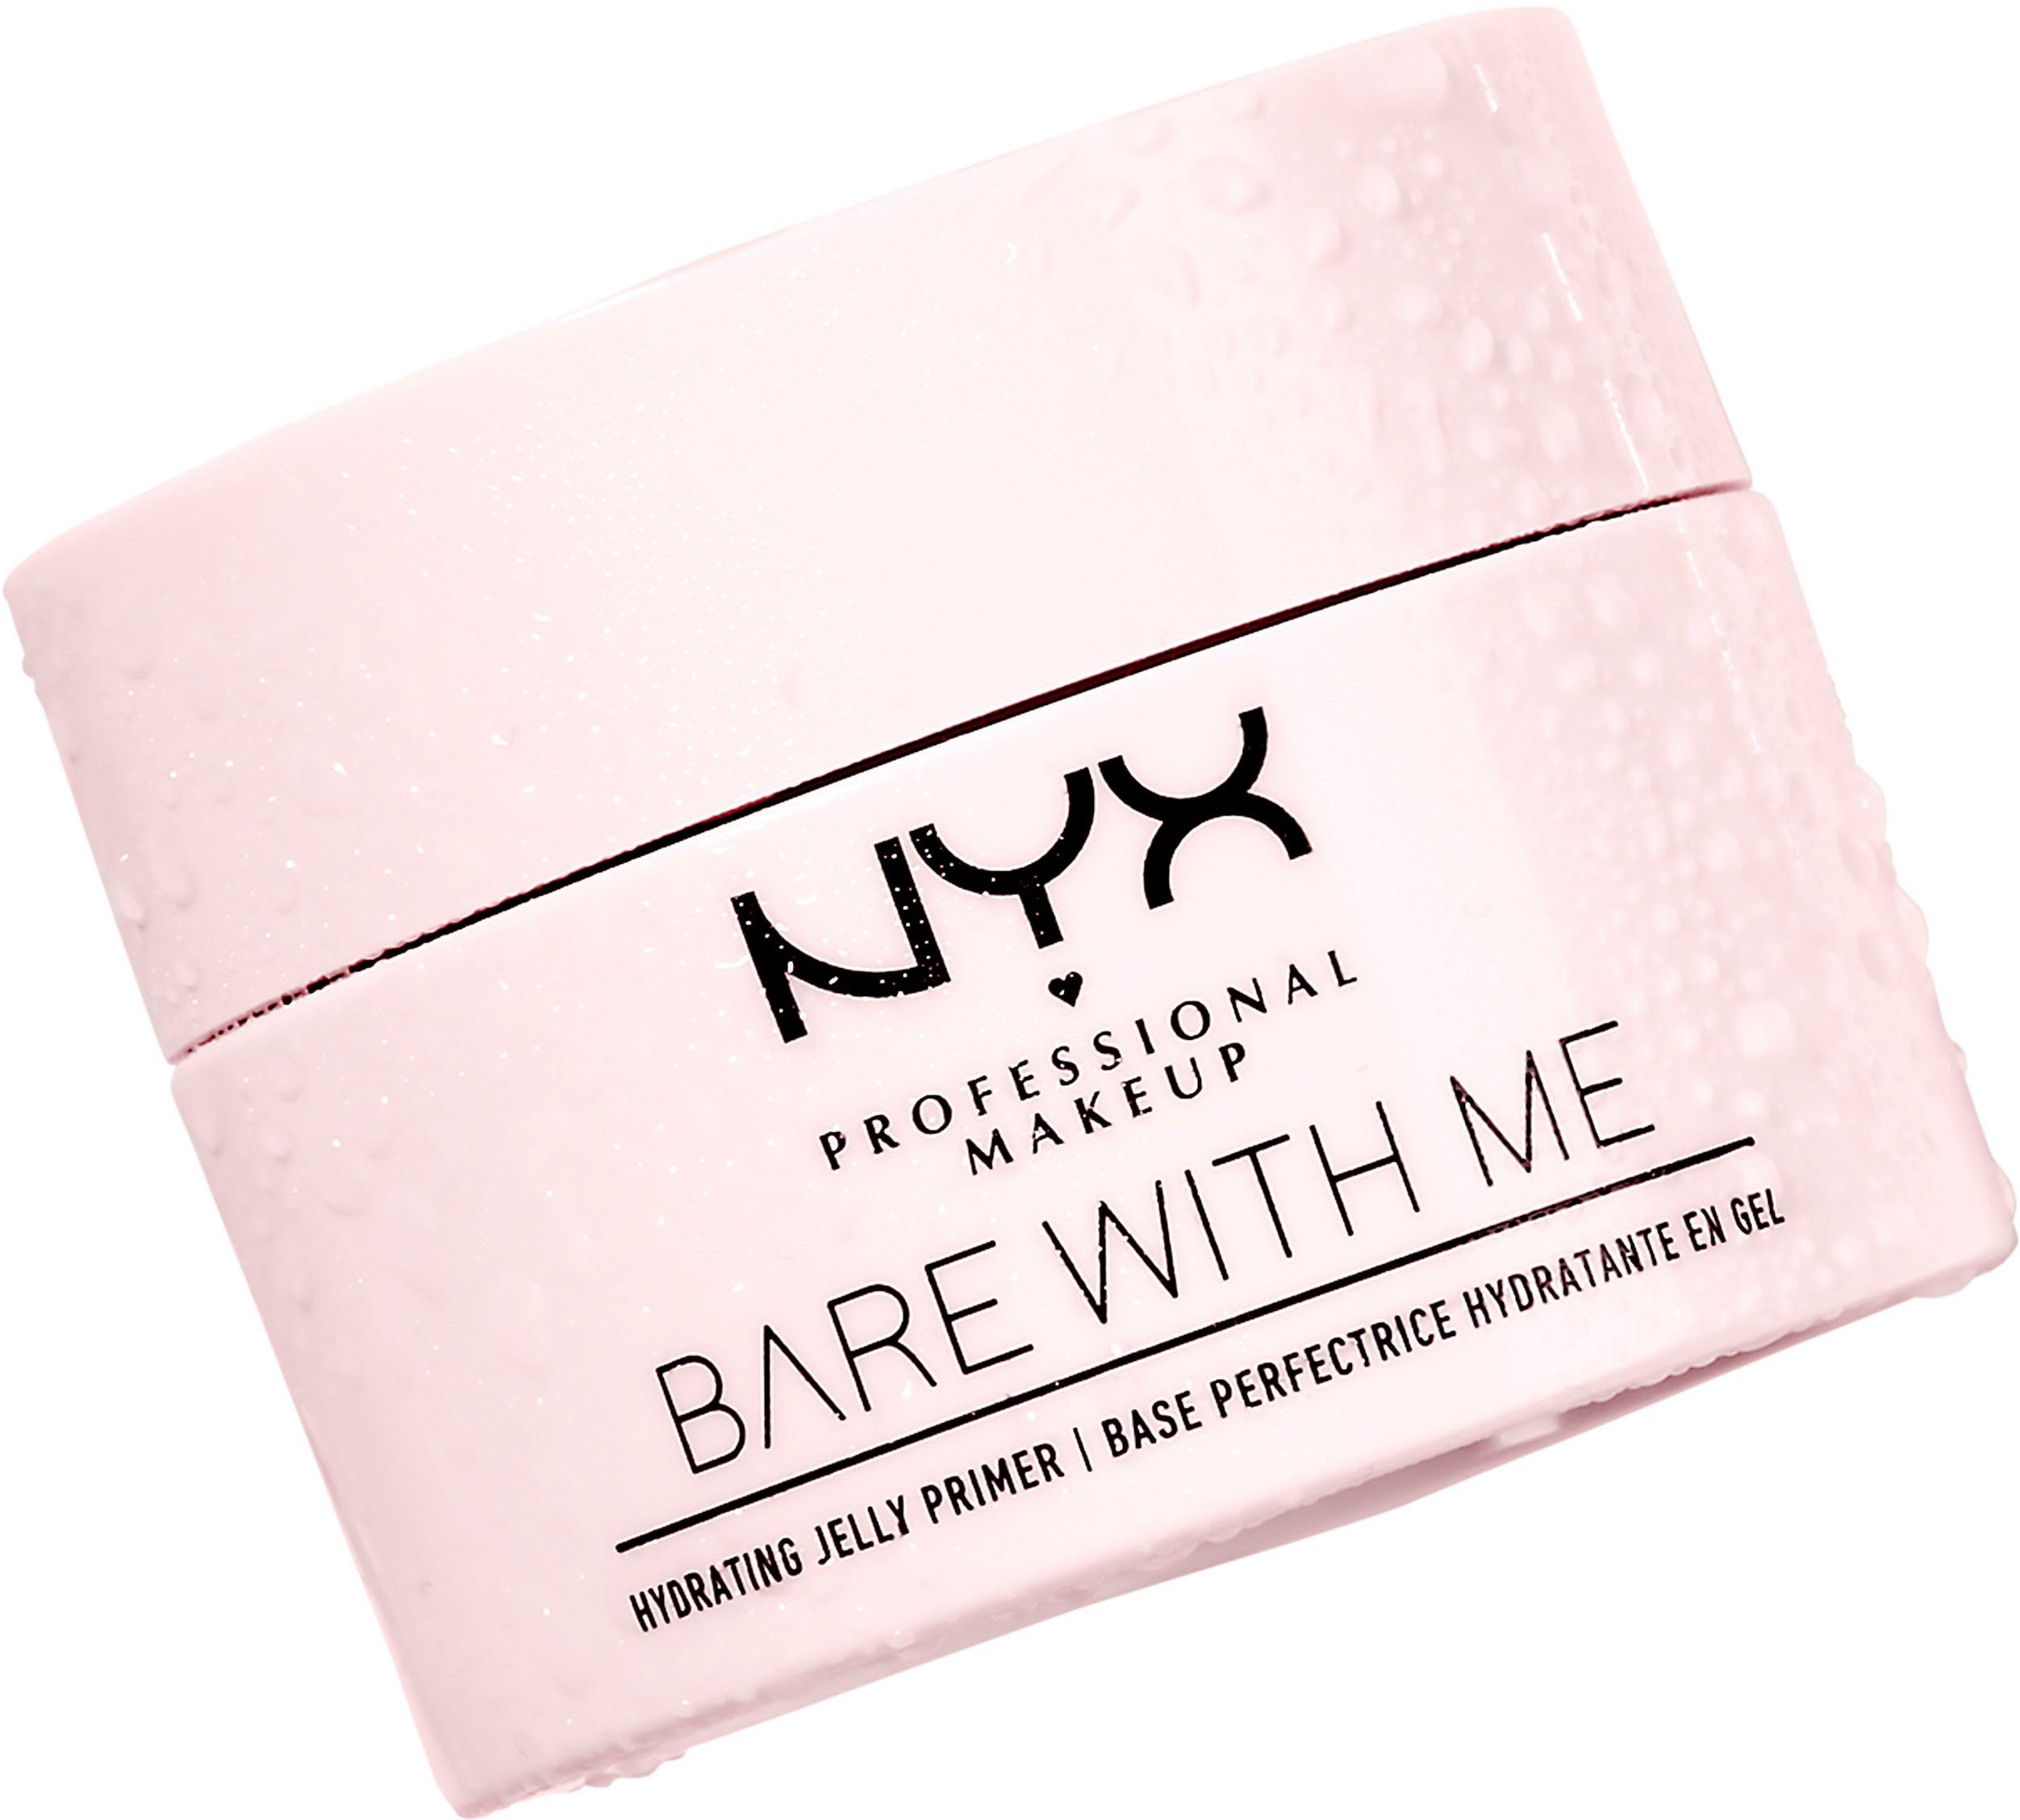 Hydrating Me Makeup Jelly NYX Bare NYX With Primer Professional Primer